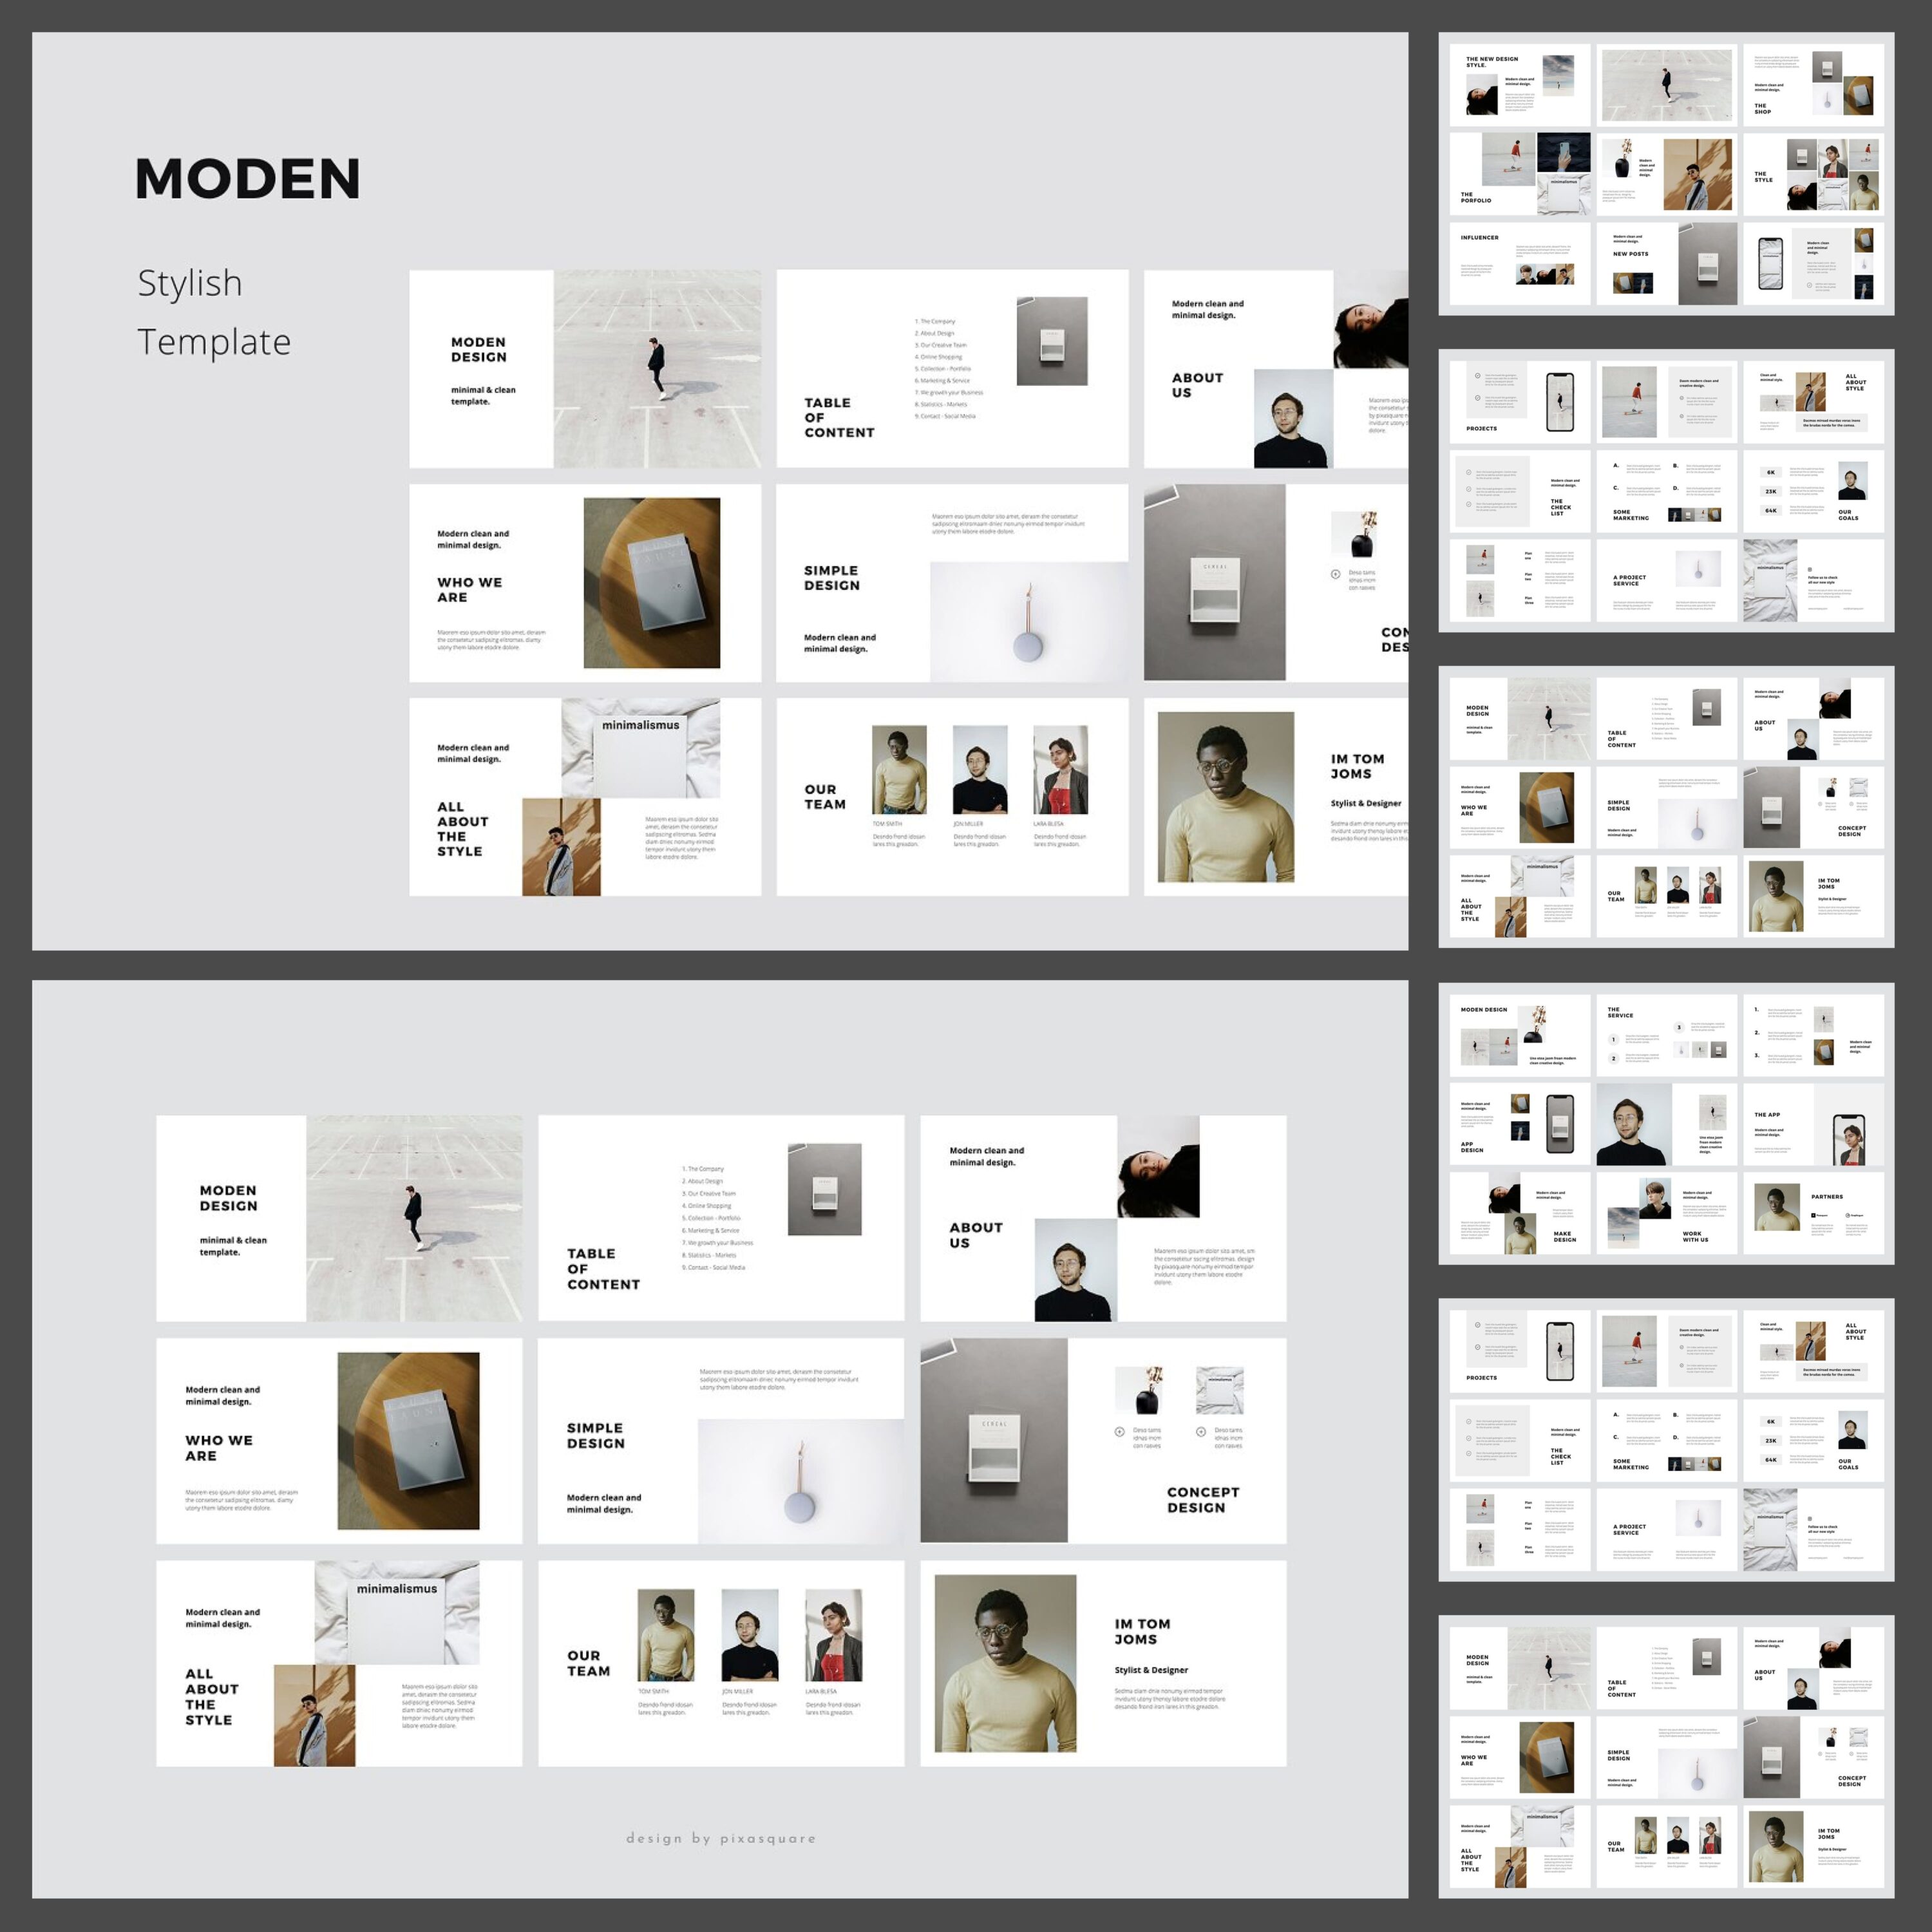 MODEN - Powerpoint Style Template cover.